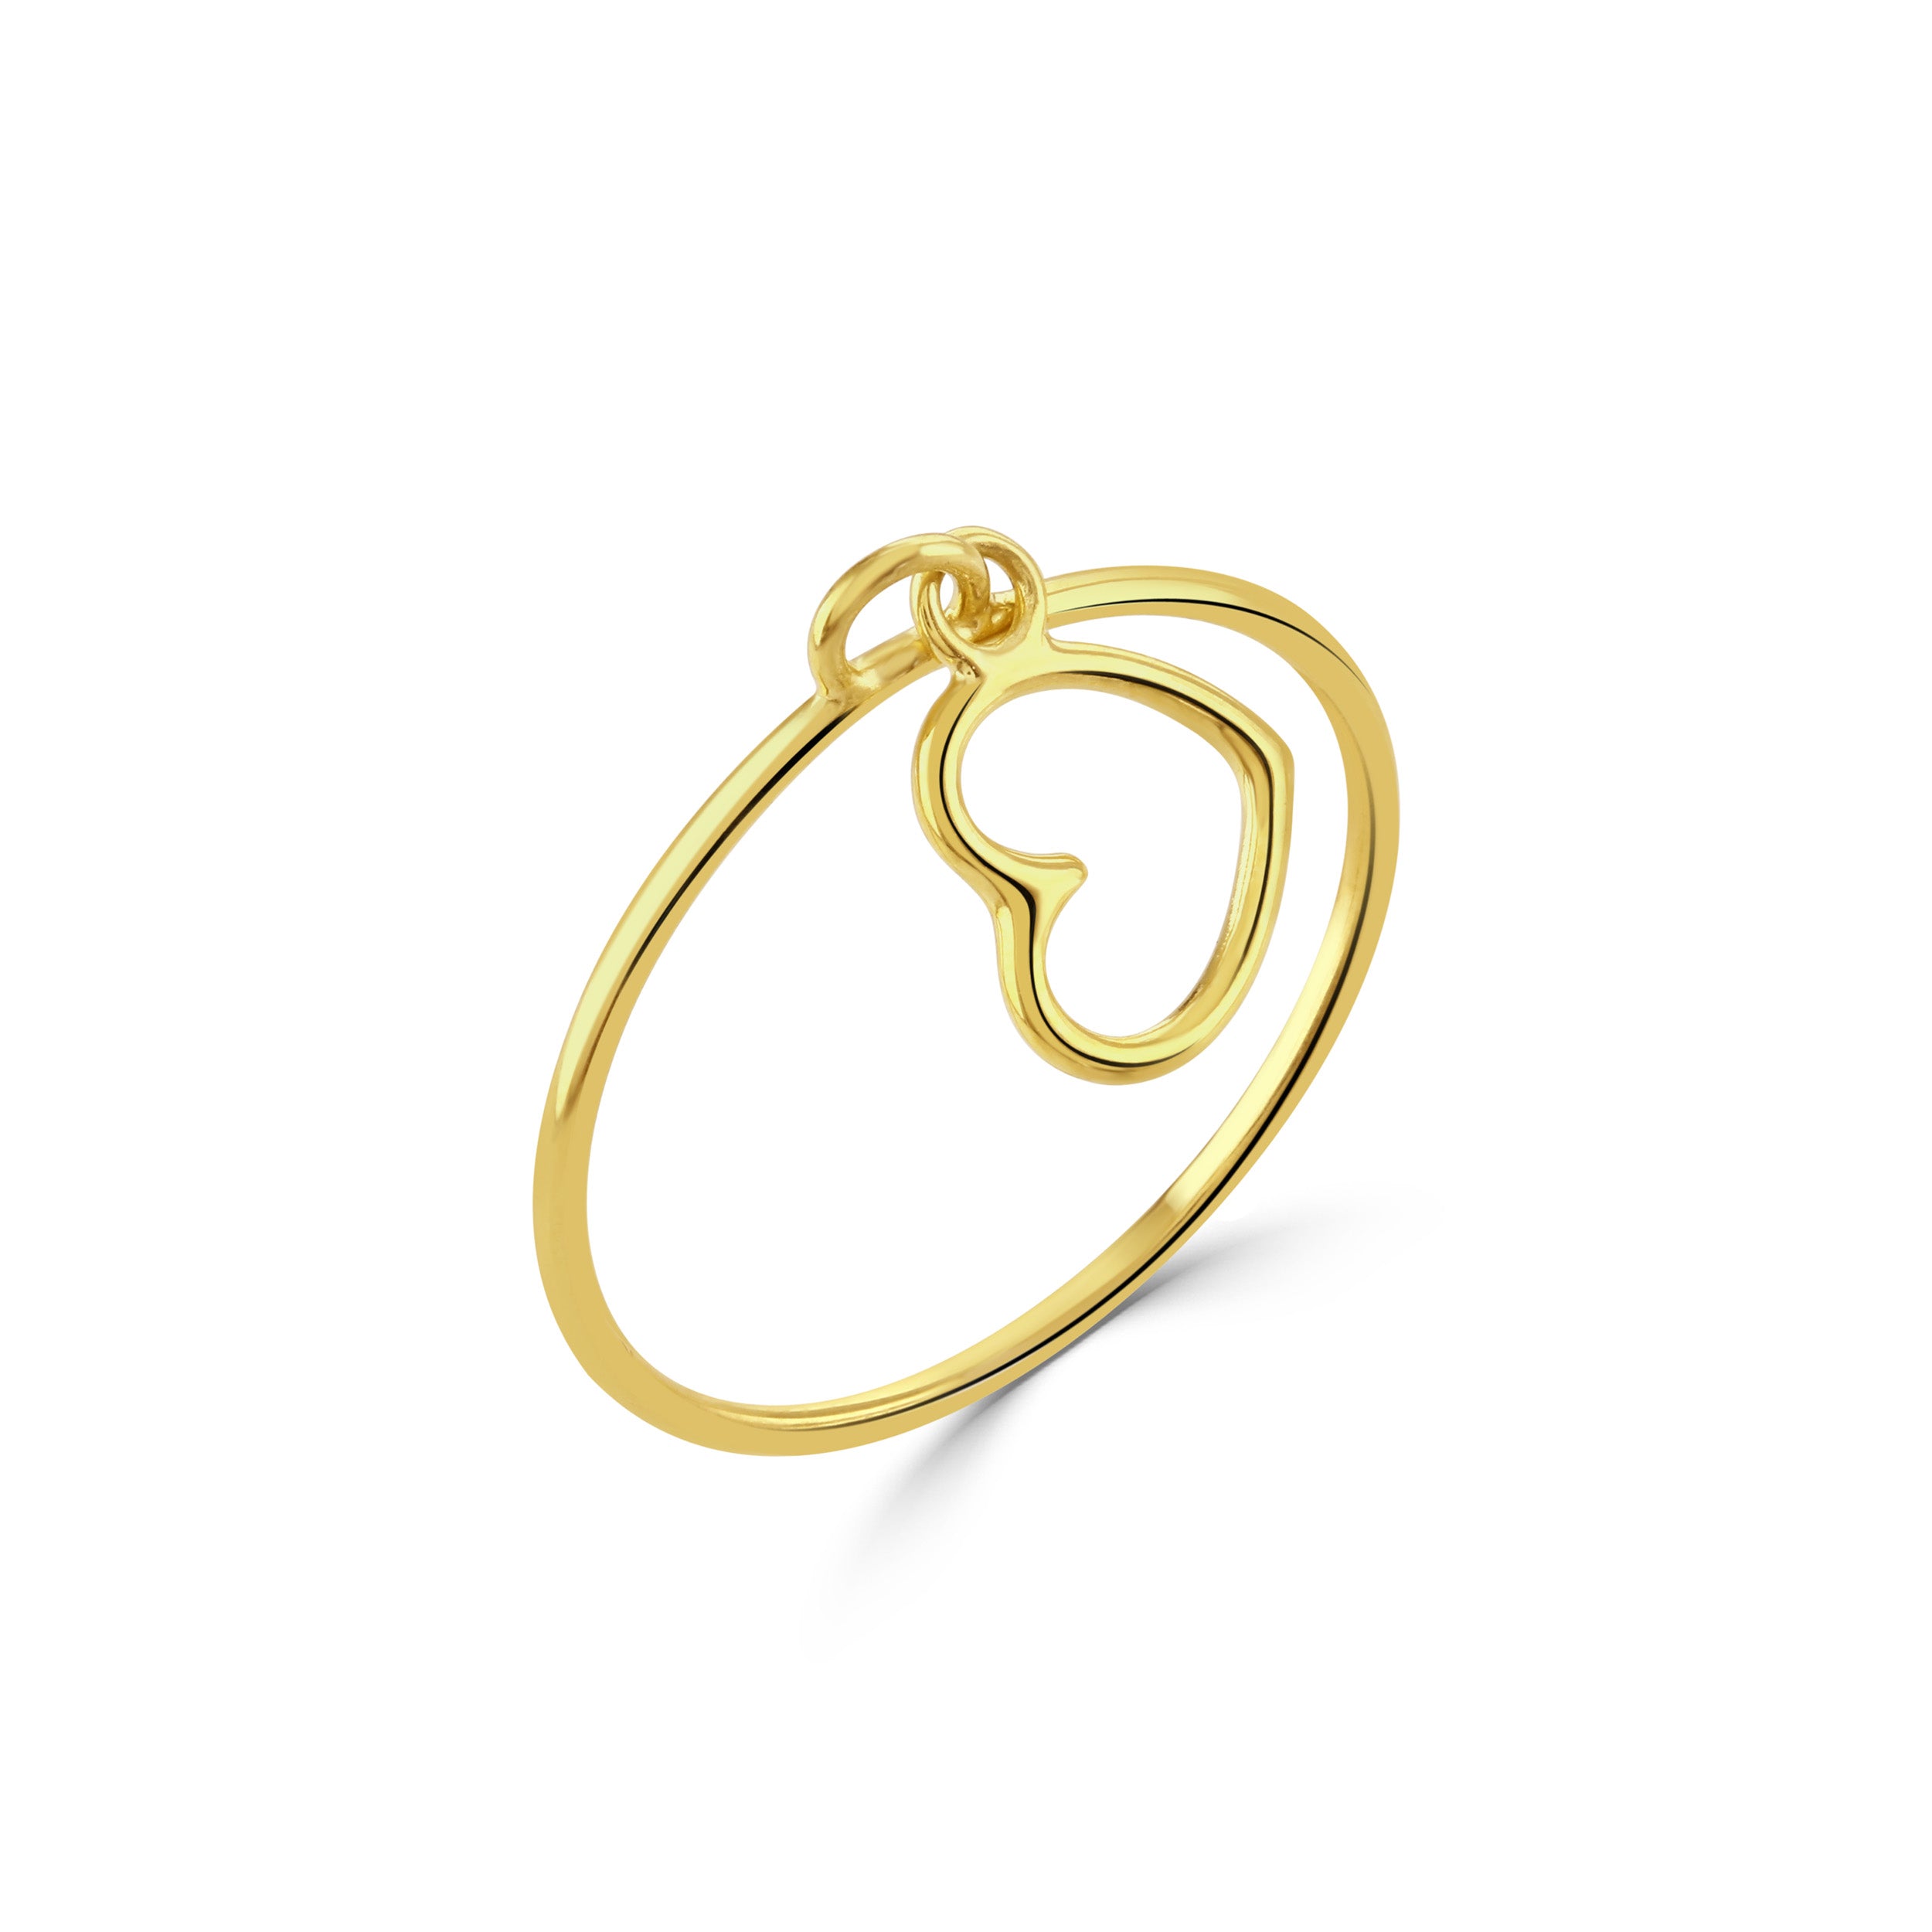 Gold Heart Charm Ring